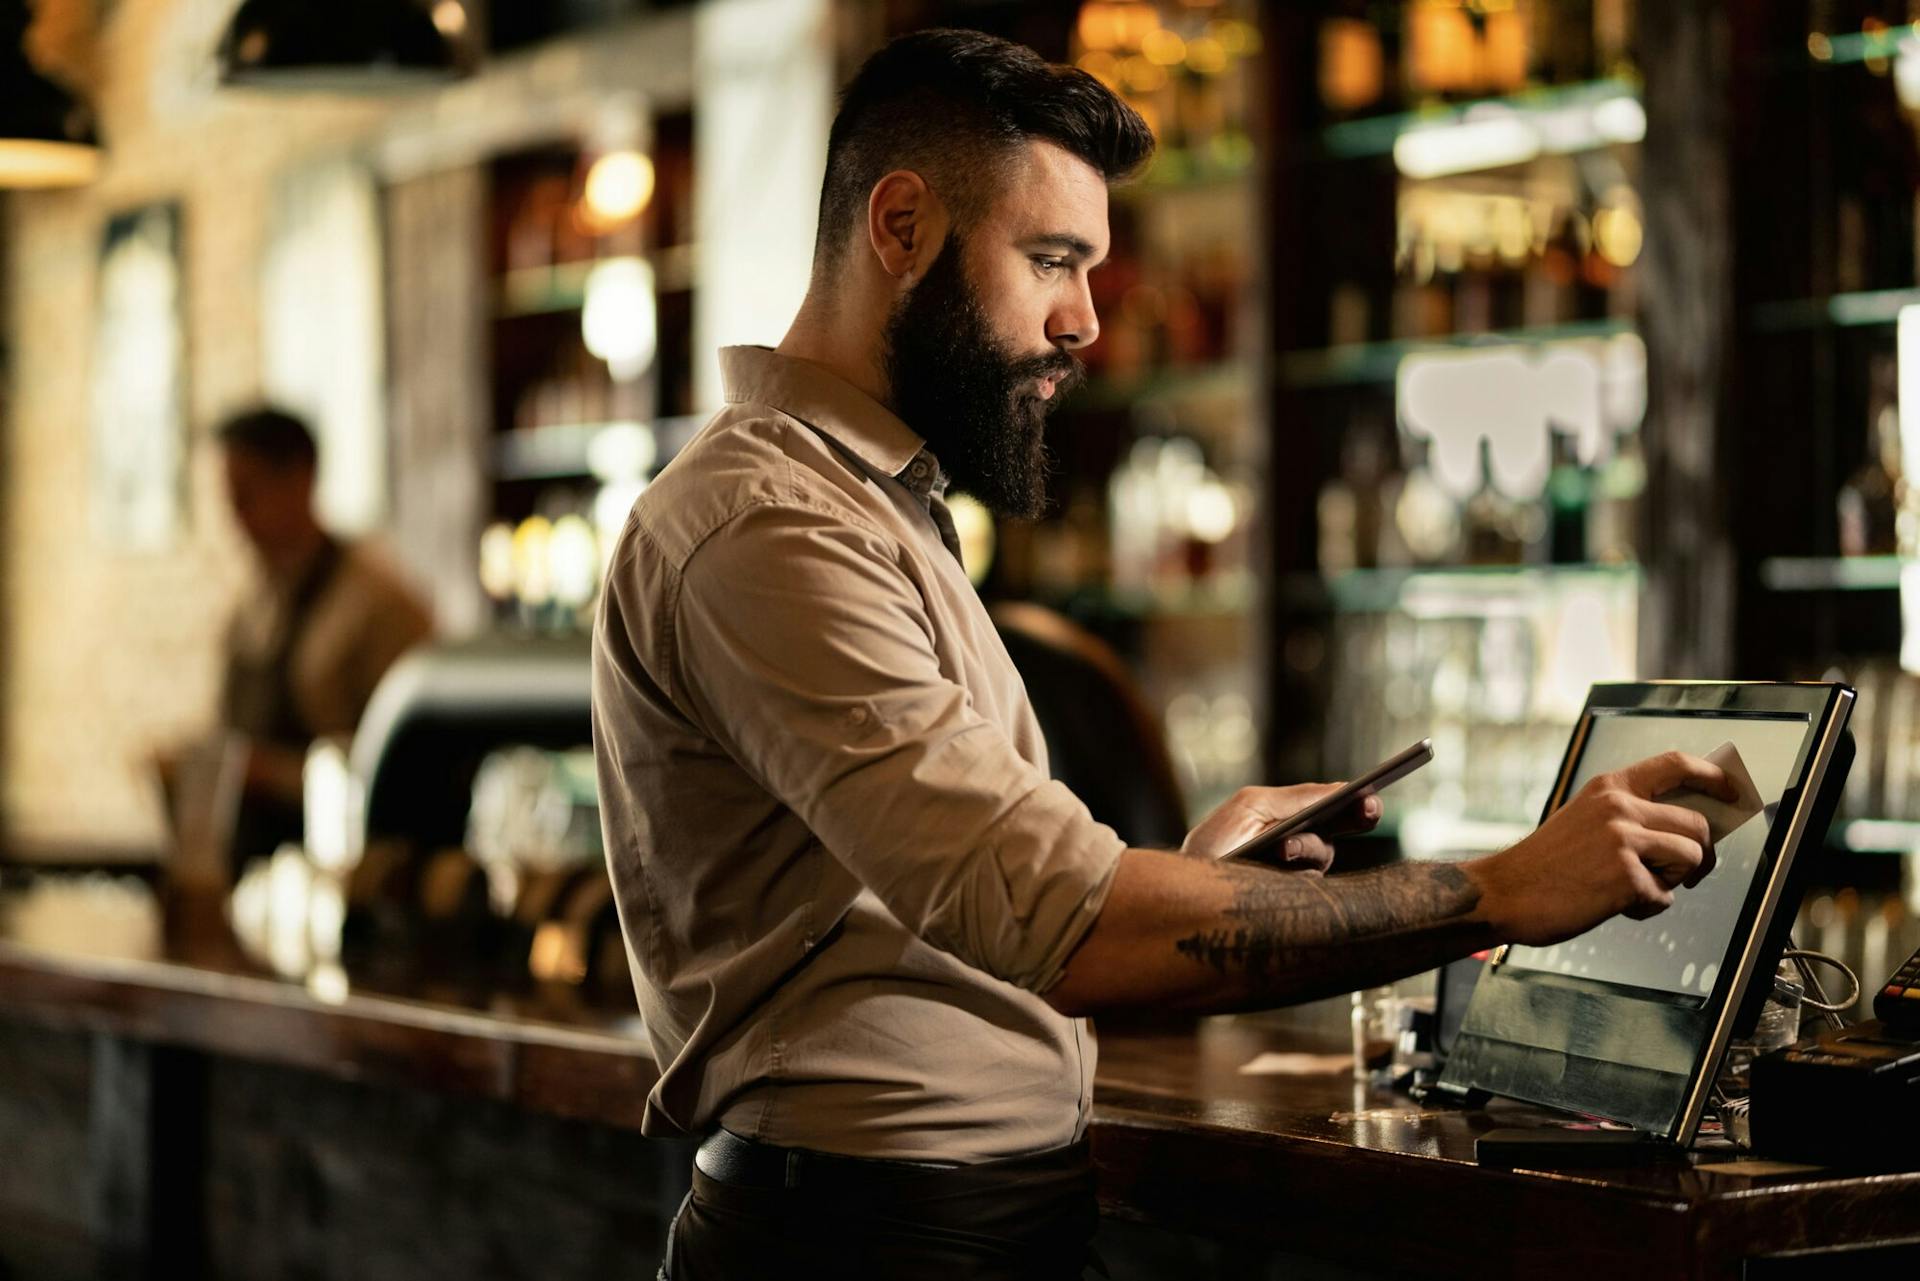 How a Cloud-Based Restaurant Point of Sale Can Give You More Data on Diners